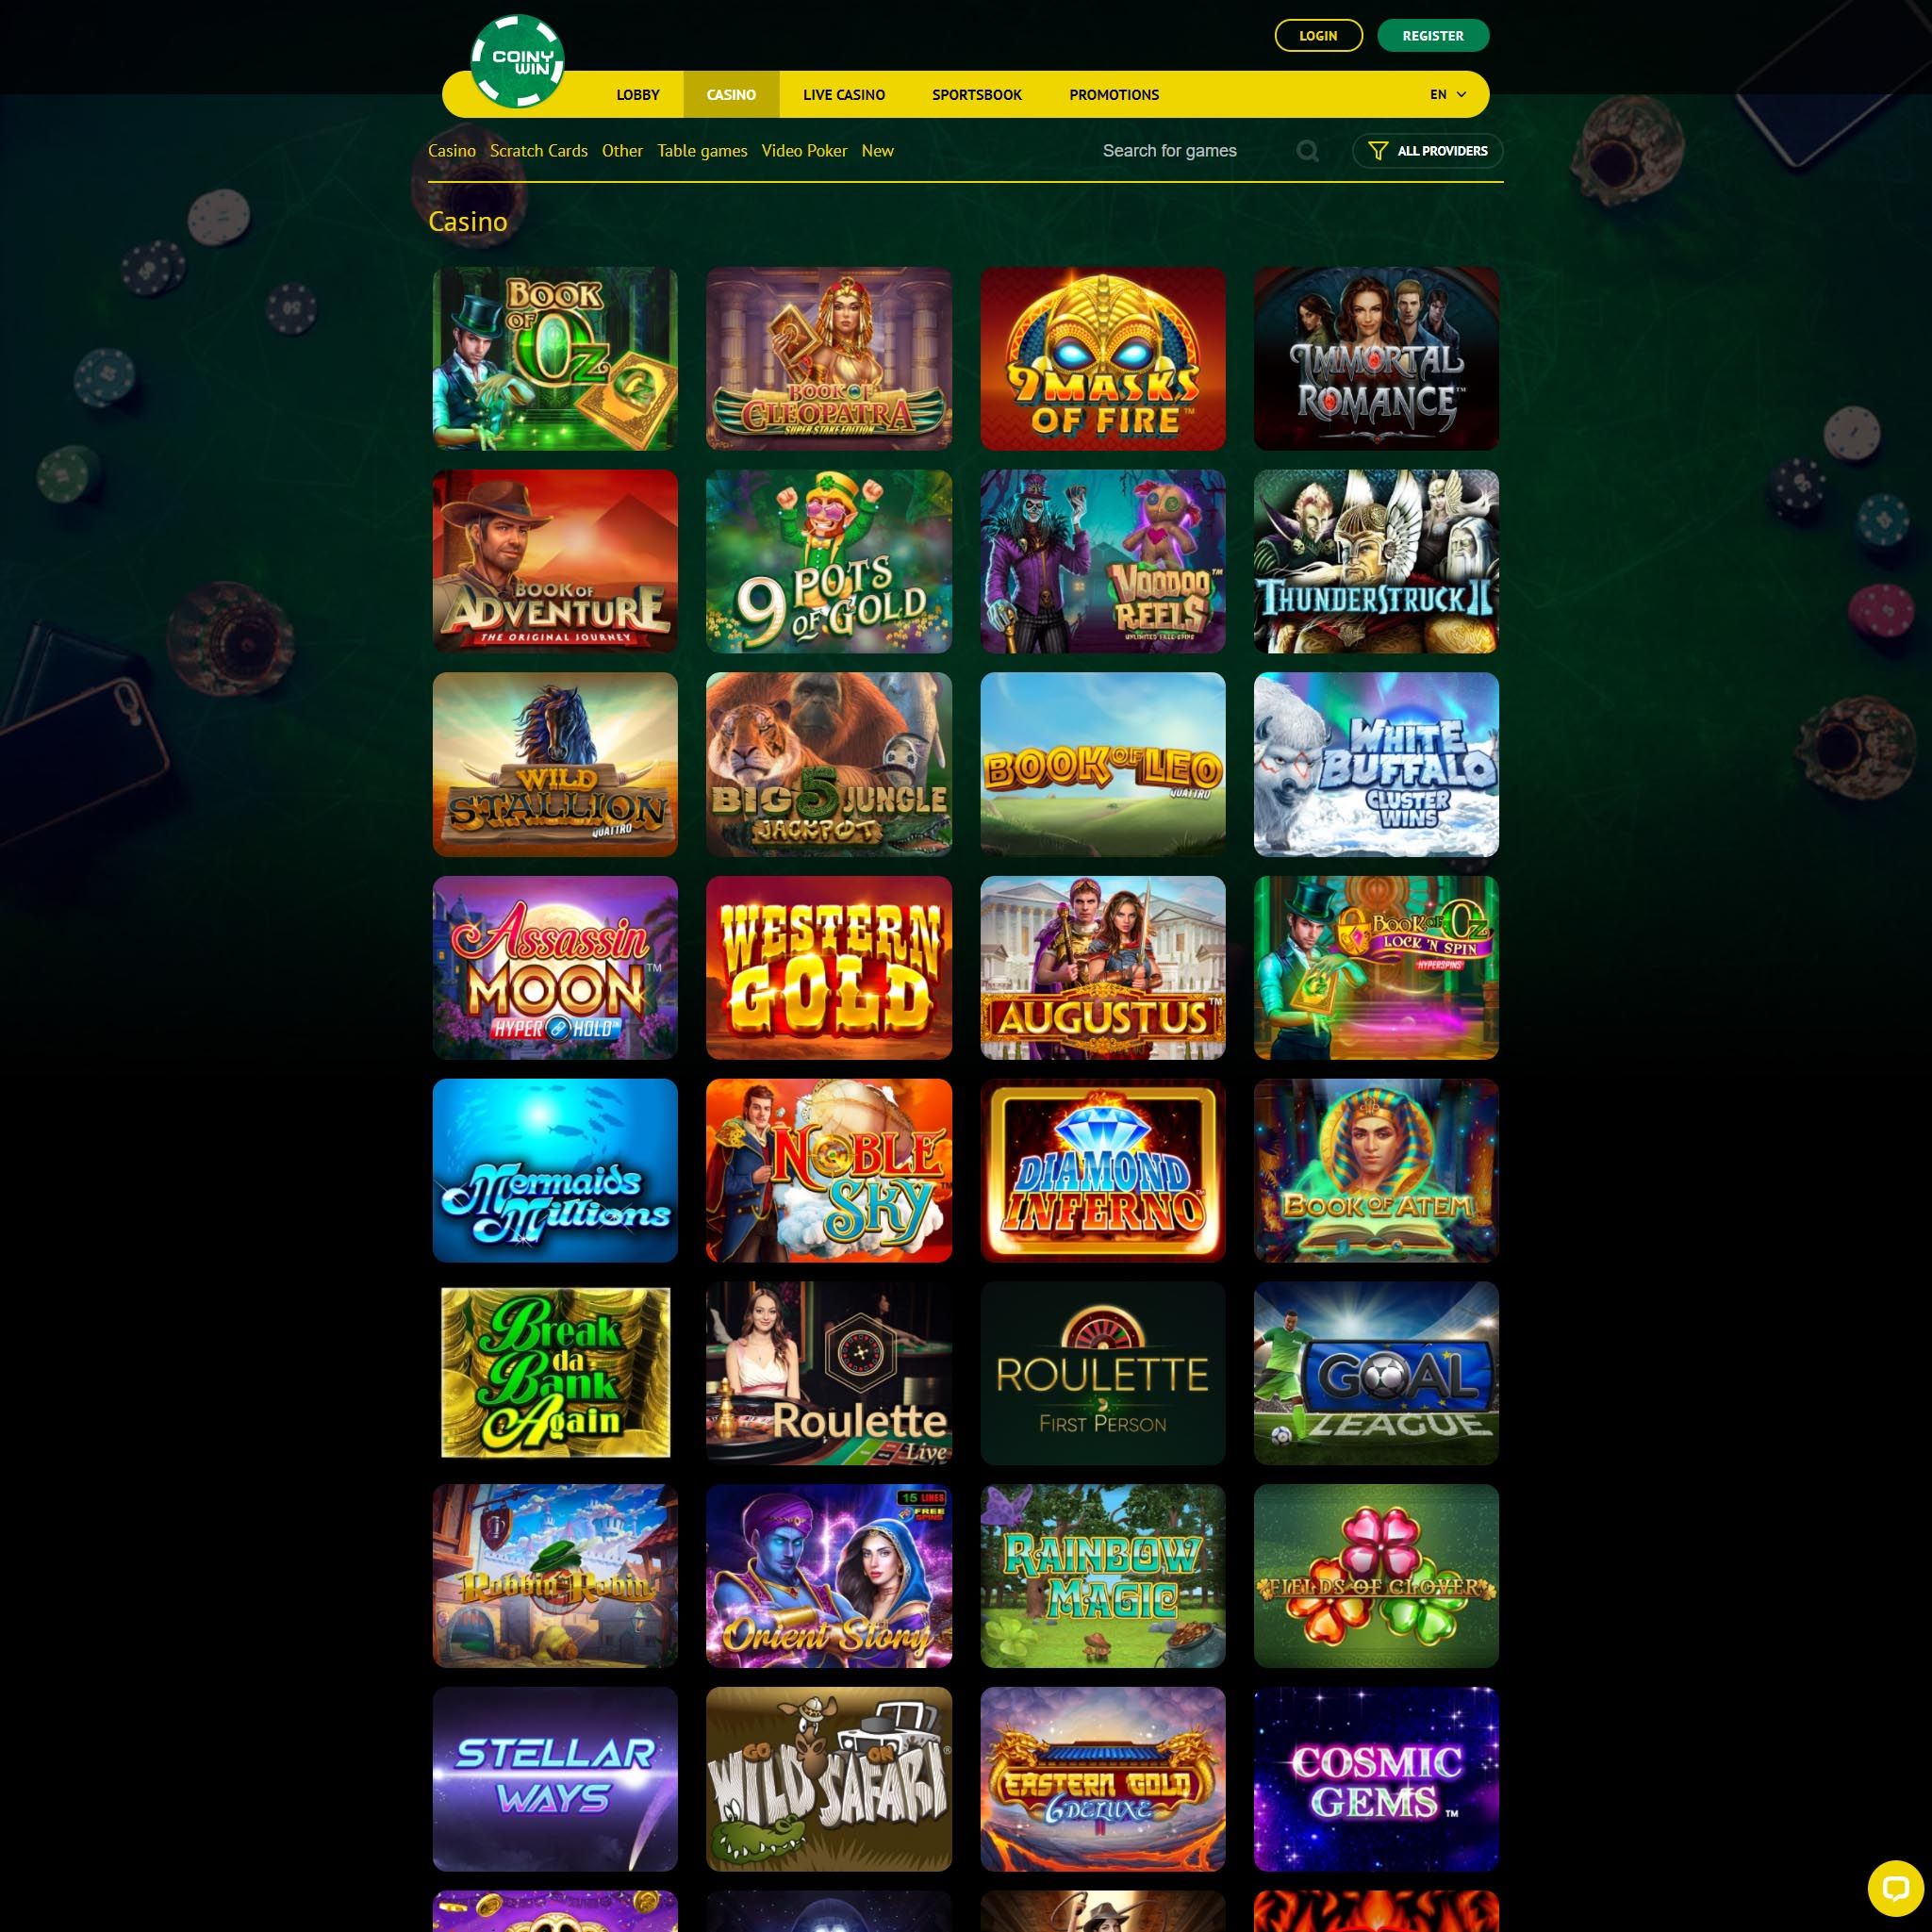 Coinywin Casino full games catalogue